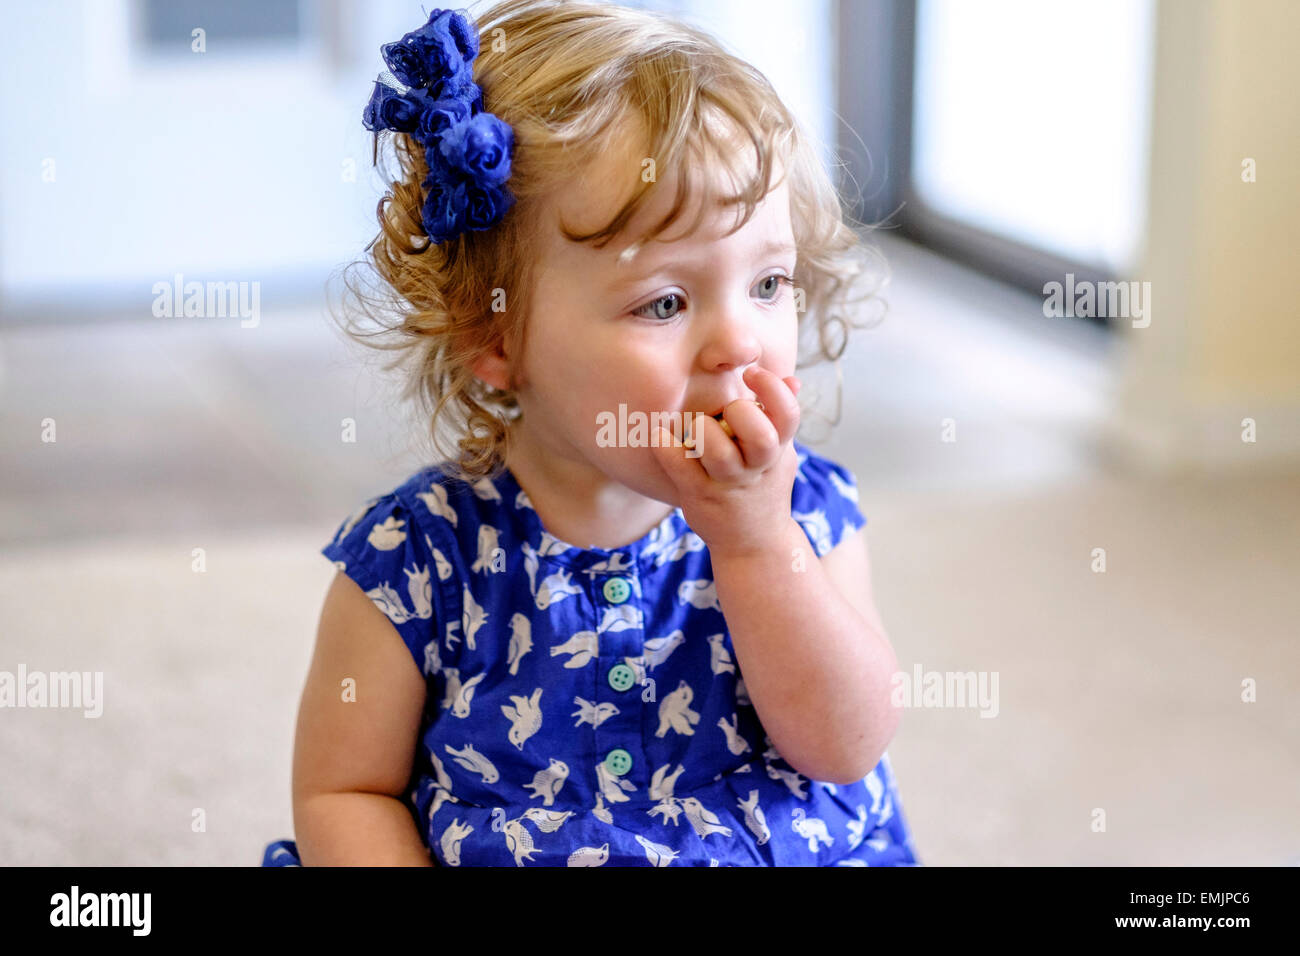 A 14 month old baby girl eats a cracker while sitting on the floor. Stock Photo